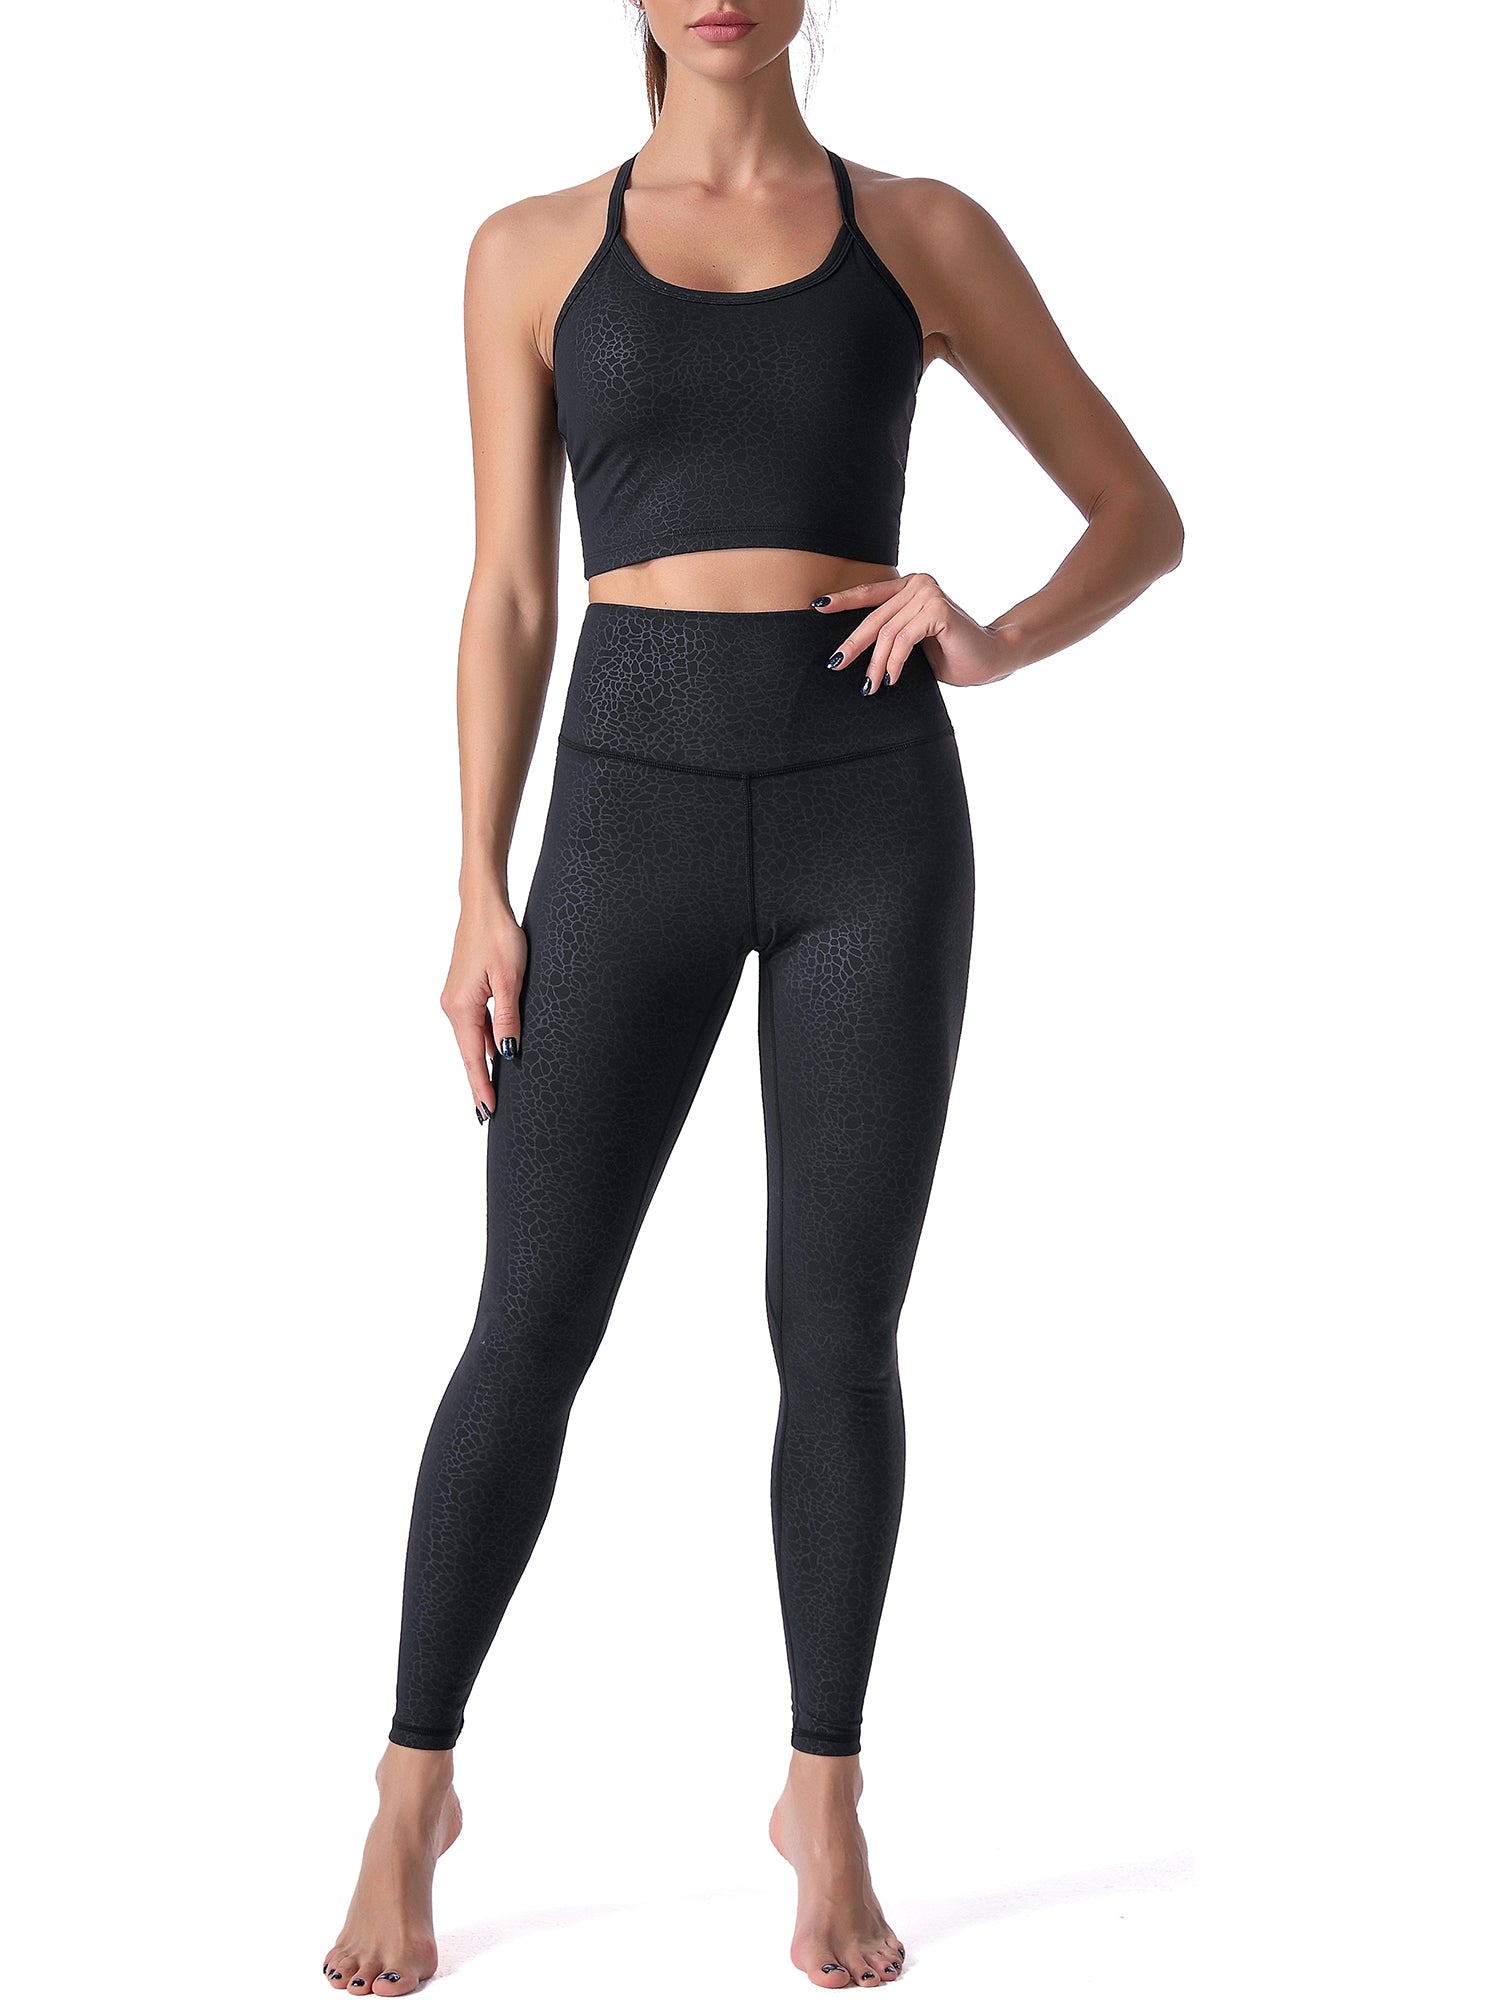 Black Workout Leggings Outfit Higher Waisted Women Pants 25 Inch Inseam  Leggings Sport Fitness Buttery Soft Gym Exercise For From Mucho, $23.28